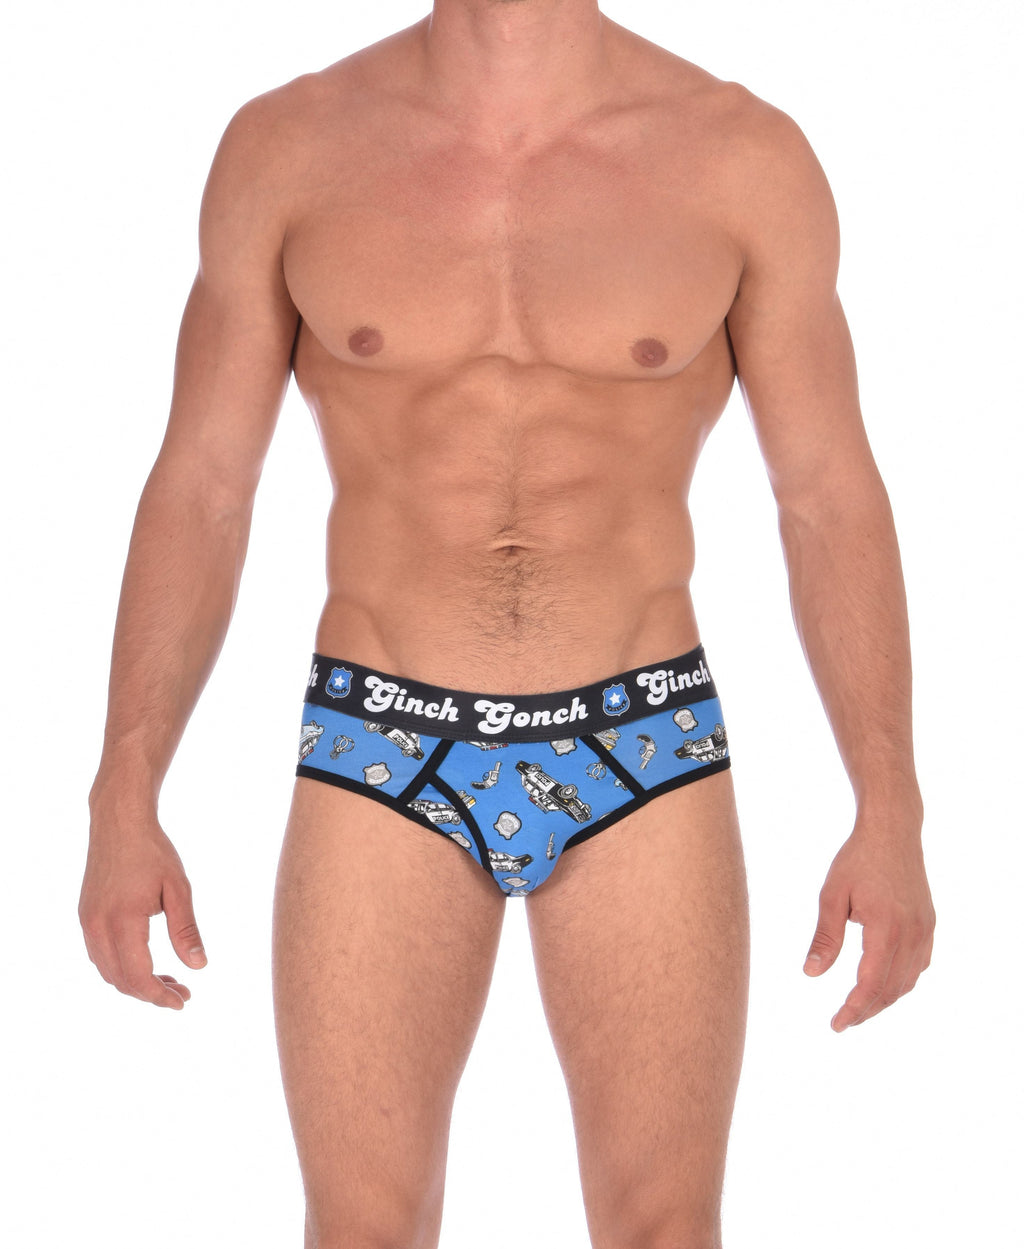 Ginch Gonch GG Patrol low rise y front Brief men's underwear blue fabric with cop cars, badges, hand cuffs, and guns. Black trim and black printed waistband front. 